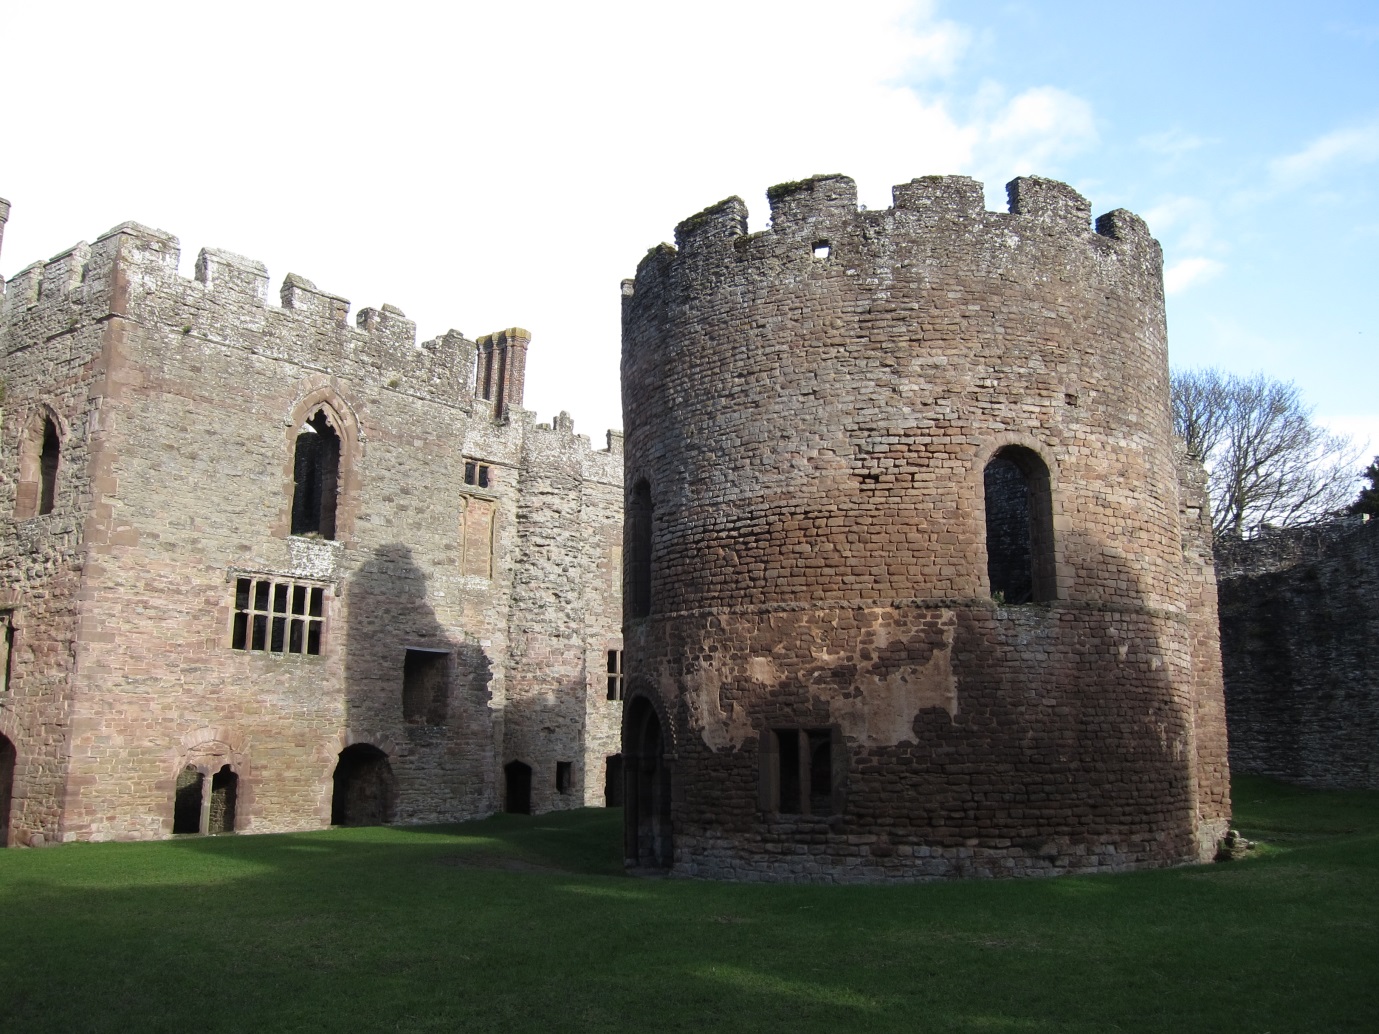 The-round-nave-of-the-Norman-Chapel-at-Ludlow-Castle-Tudor-Times-2015